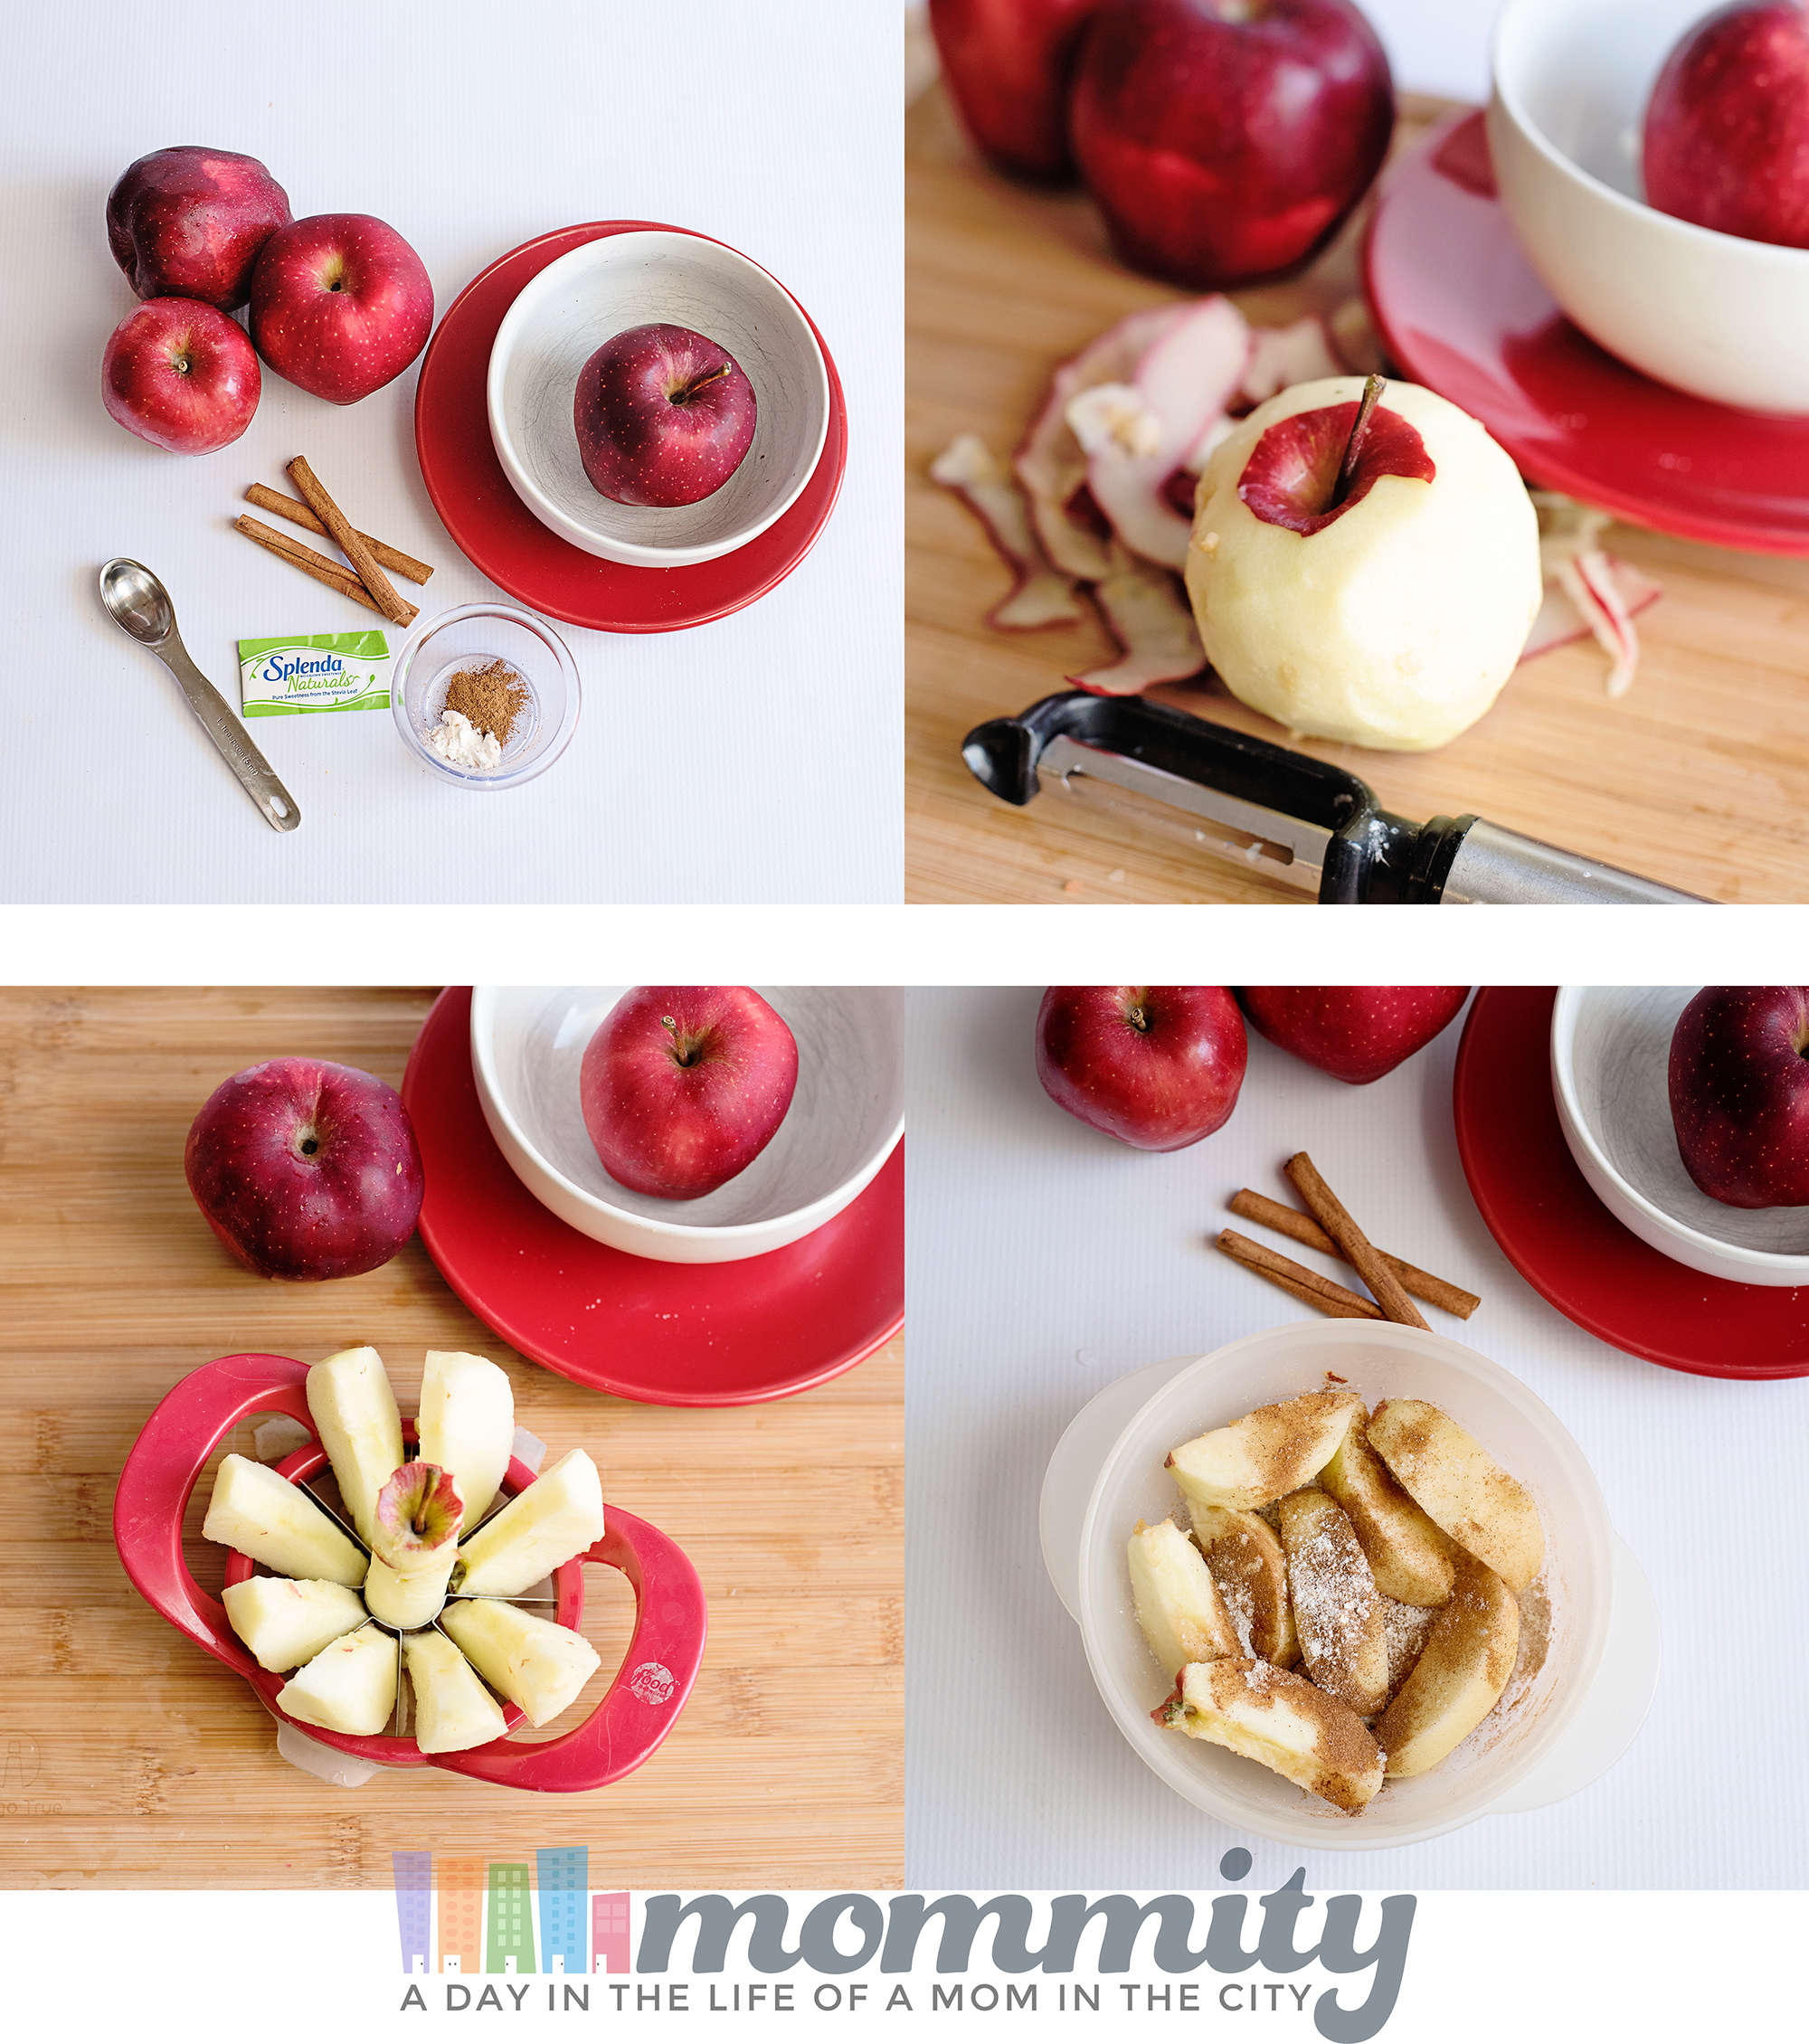 Looking for an easy baked apple recipe? This recipe can be whipped in the microwave and will become a favorite at 0 Weight Watchers Freestyle Points! Perfect on Weight Watchers or any other low calorie diet.